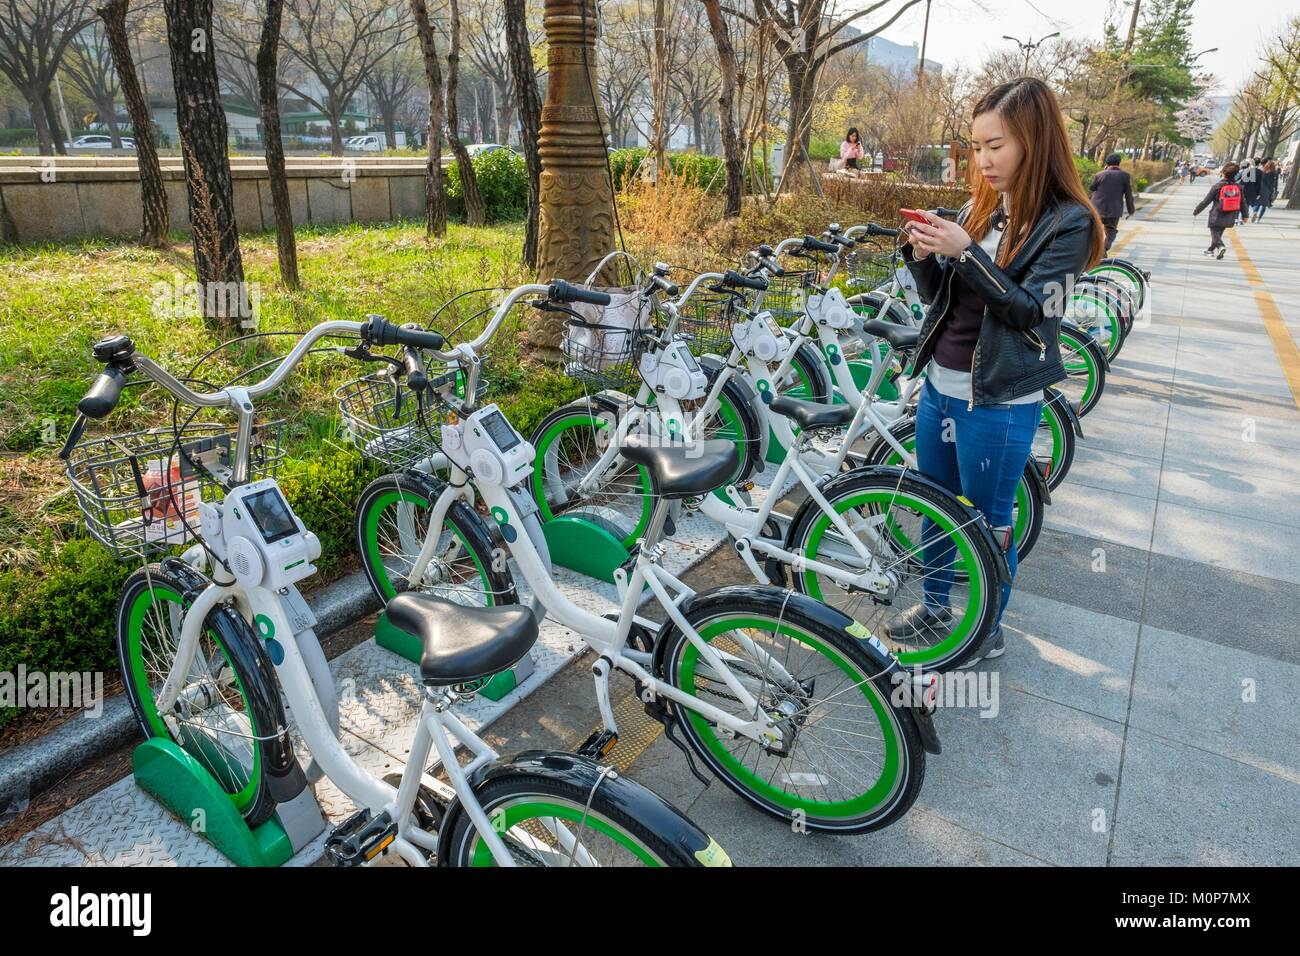 South Korea,Seoul,Yeongdeungpo-gu district,Yeouido is an island on the Han river and Seoul's main finance and investment banking district,Seoul Bike bikes for rent in the Yeouido Park Stock Photo